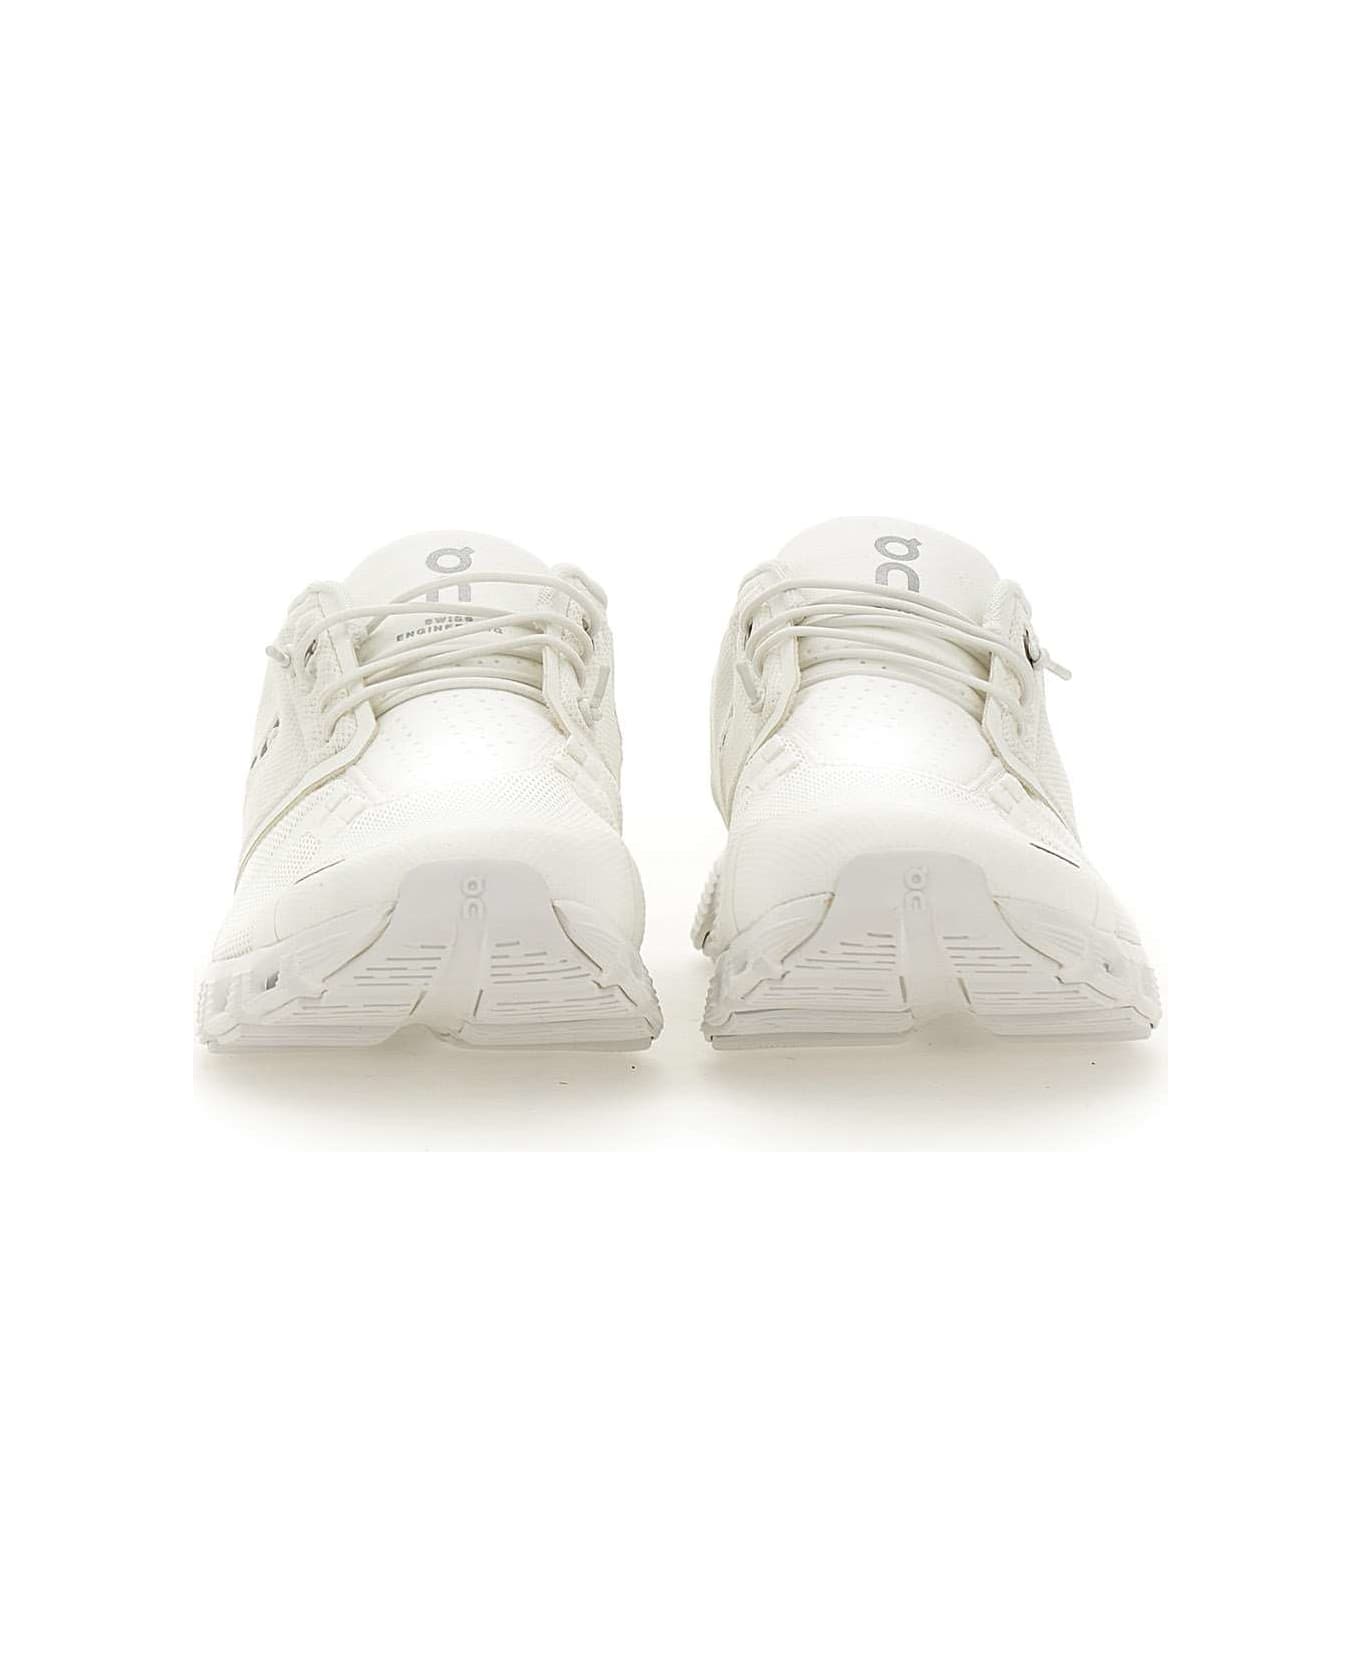 ON "cloud 5" Sneakers - WHITE スニーカー